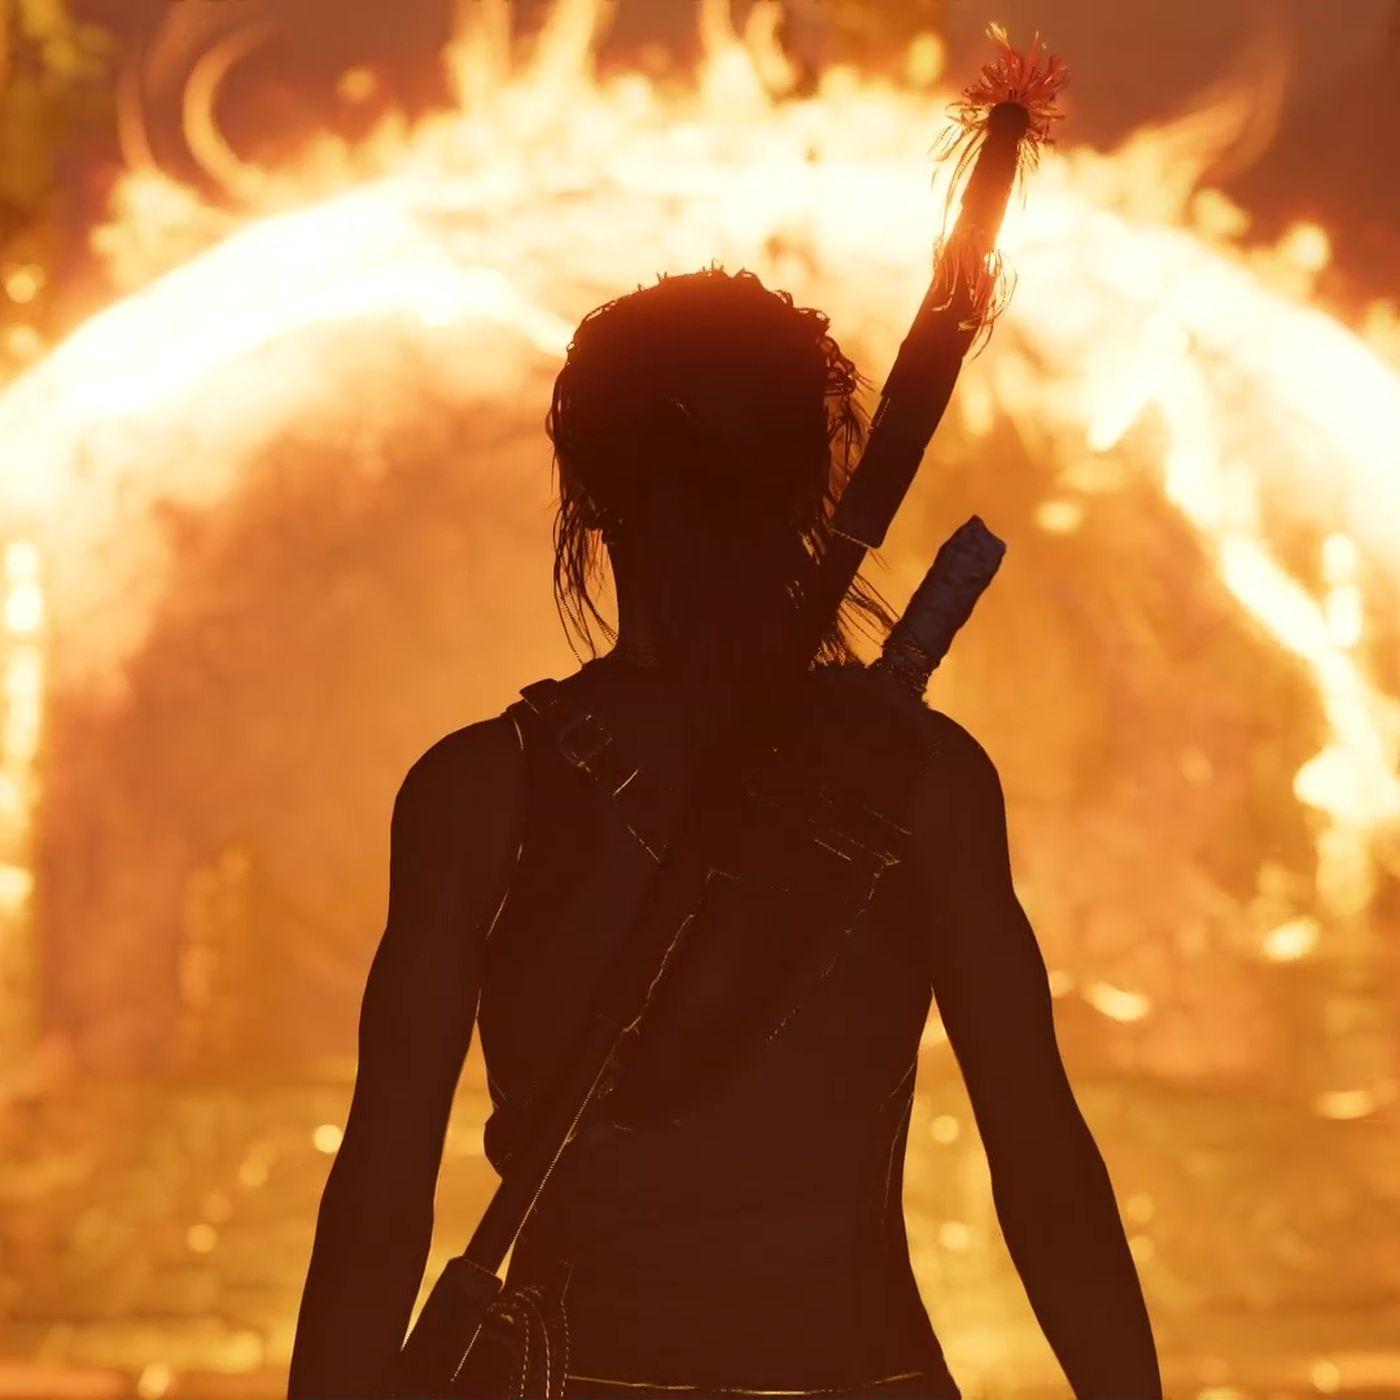 Watch 5 minutes of Shadow of the Tomb Raider gameplay